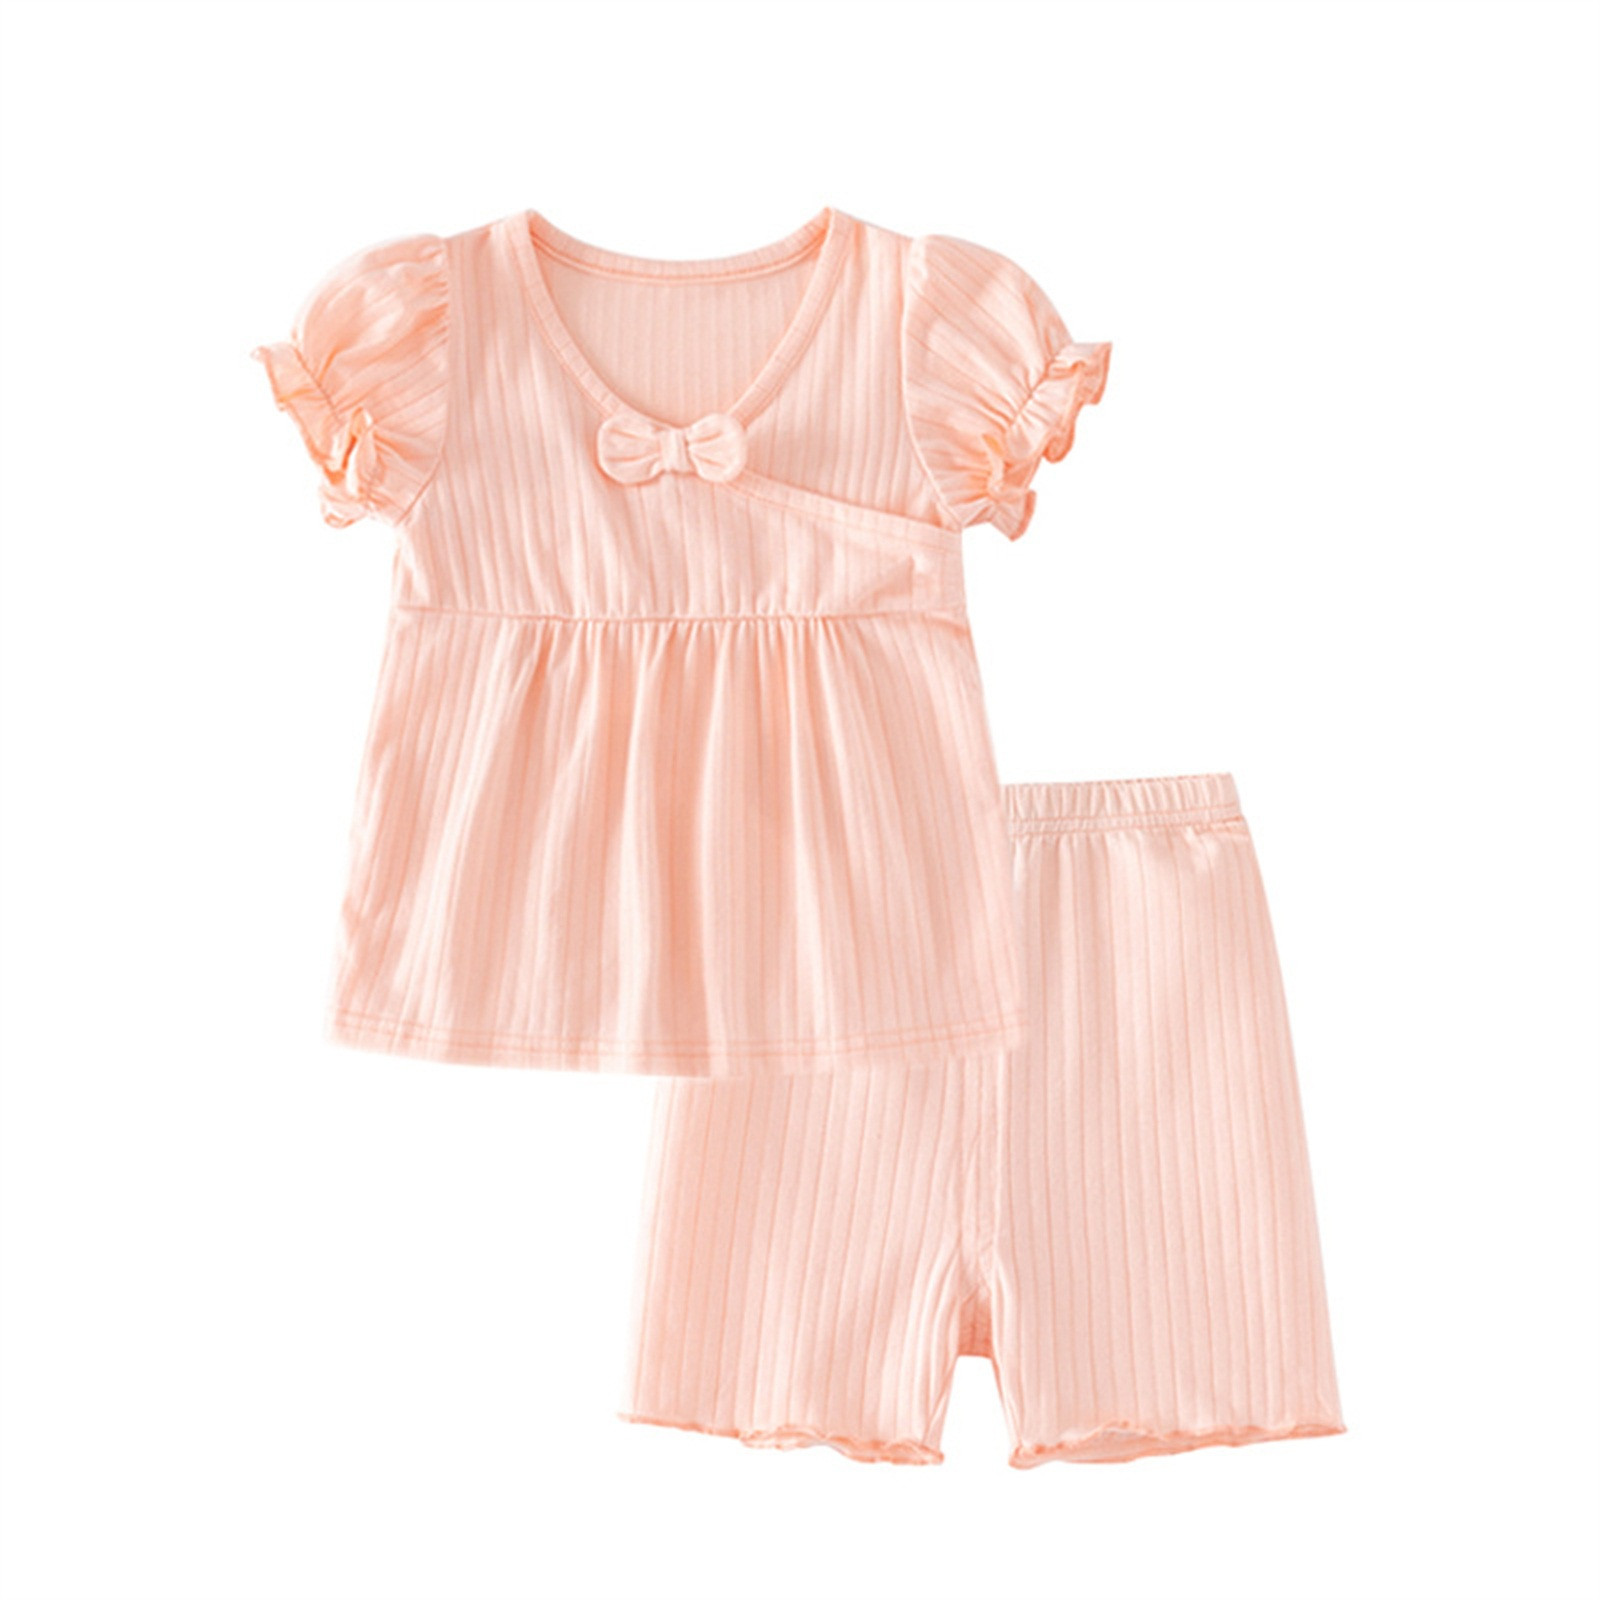 Baby Girl Outfits Spring Summer Solid Ruffle Short Sleeve T Shirt ...